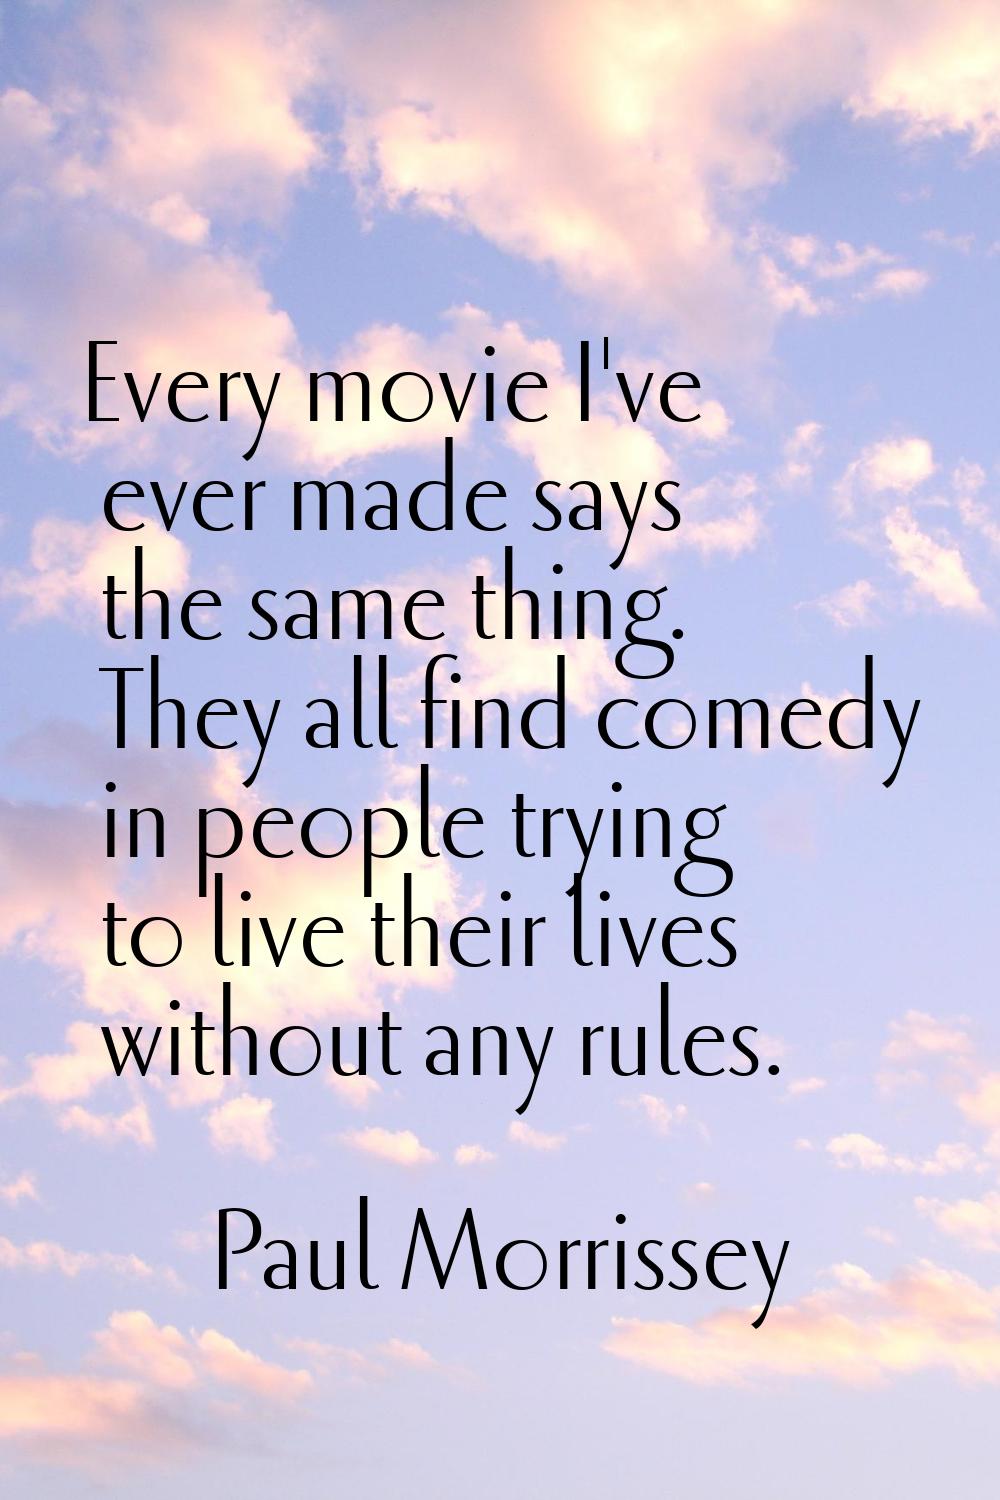 Every movie I've ever made says the same thing. They all find comedy in people trying to live their